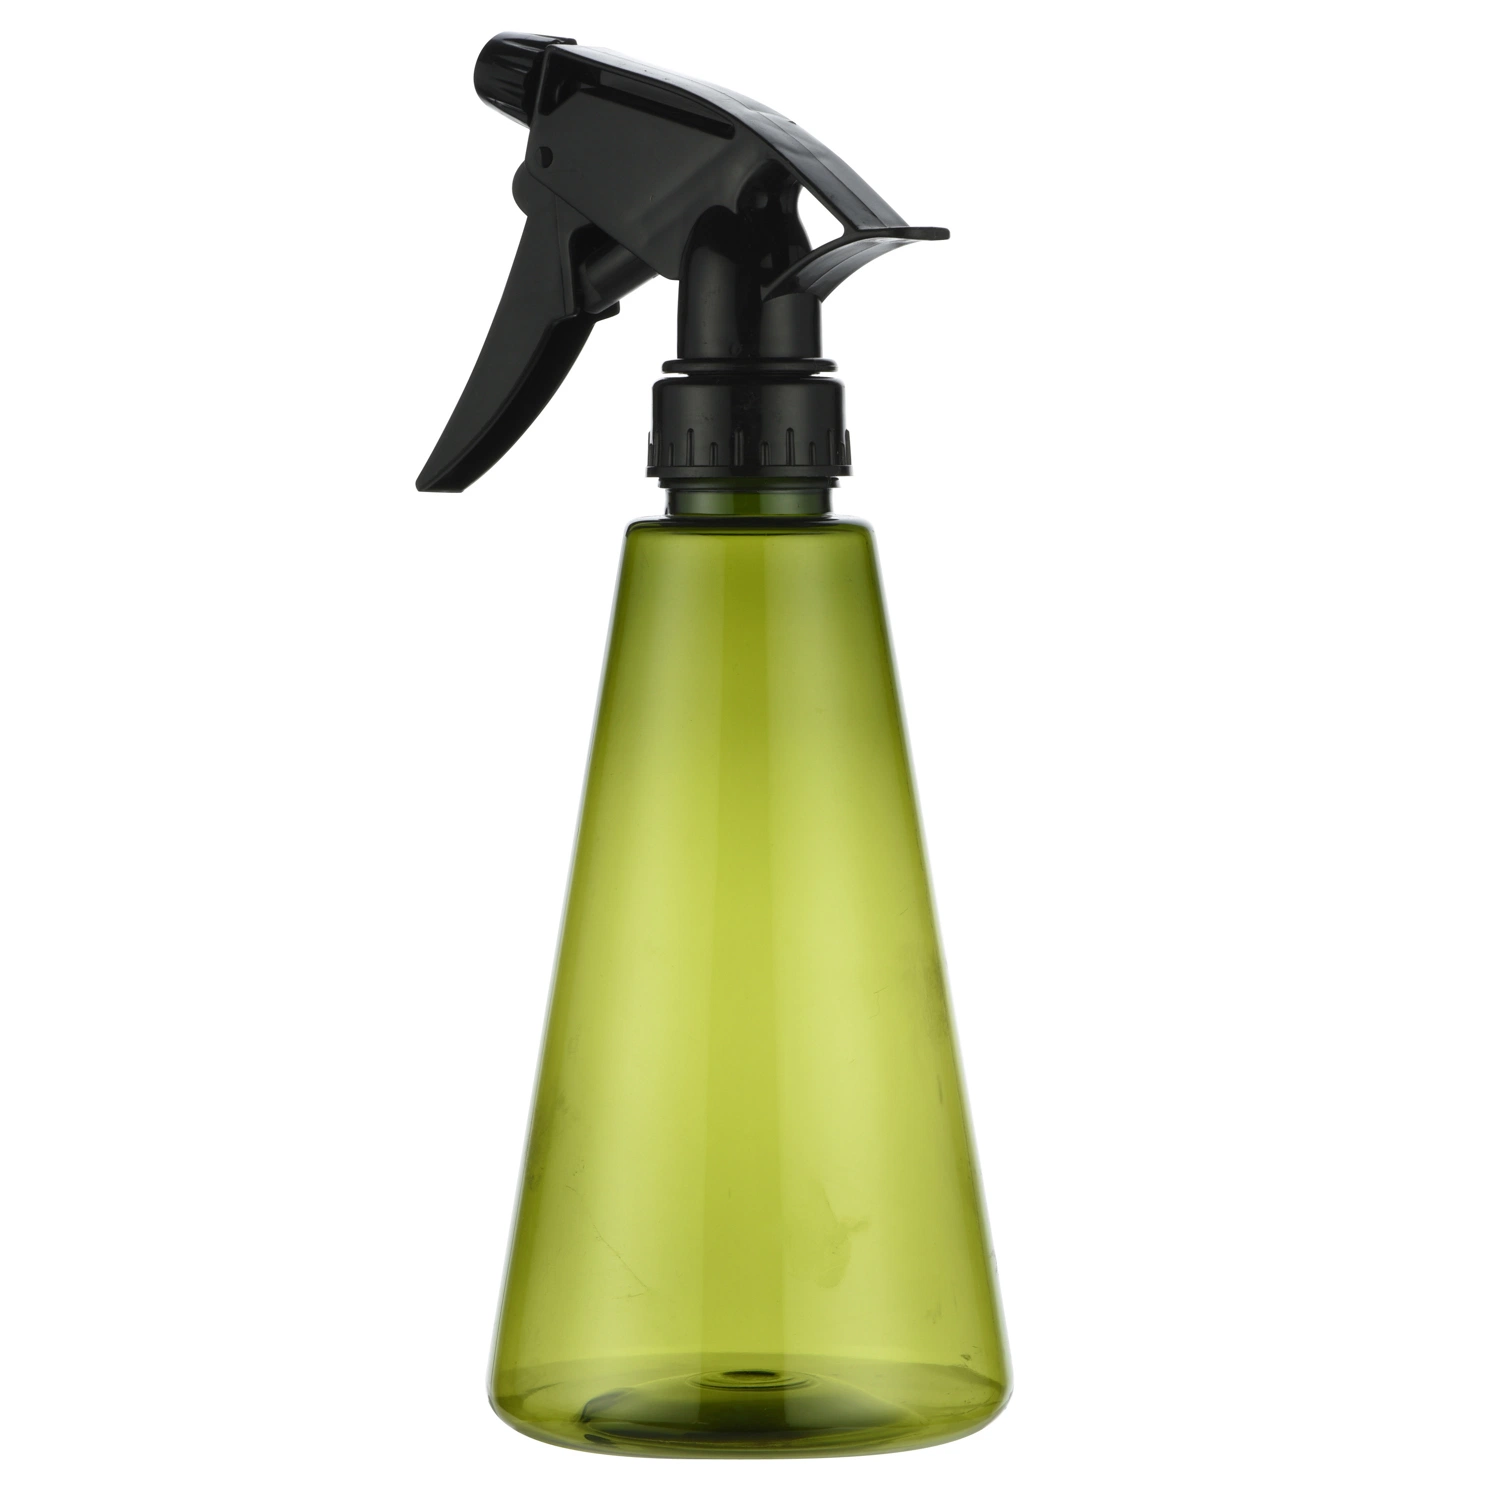 500ml Water Spray Bottles for Household Cleaning